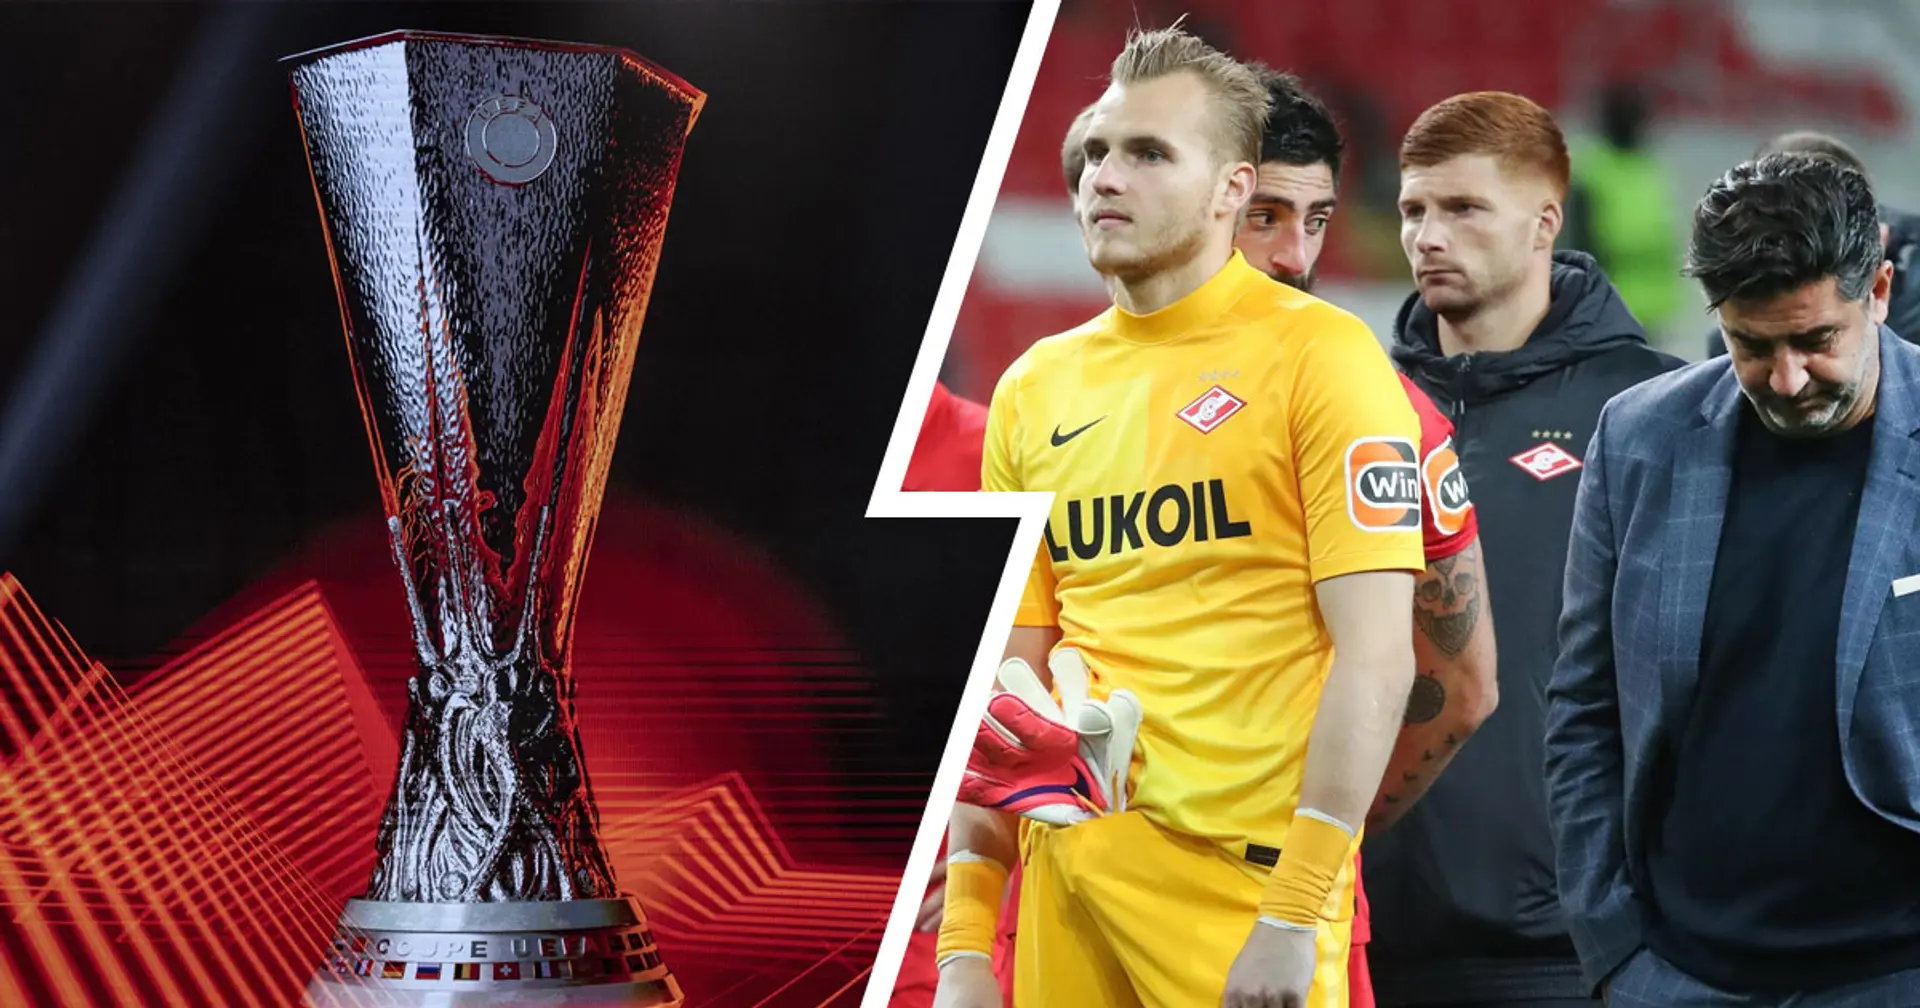 'We believe sport should aim to build bridges and not burn them': Spartak Moscow react to being kicked out of Europa League